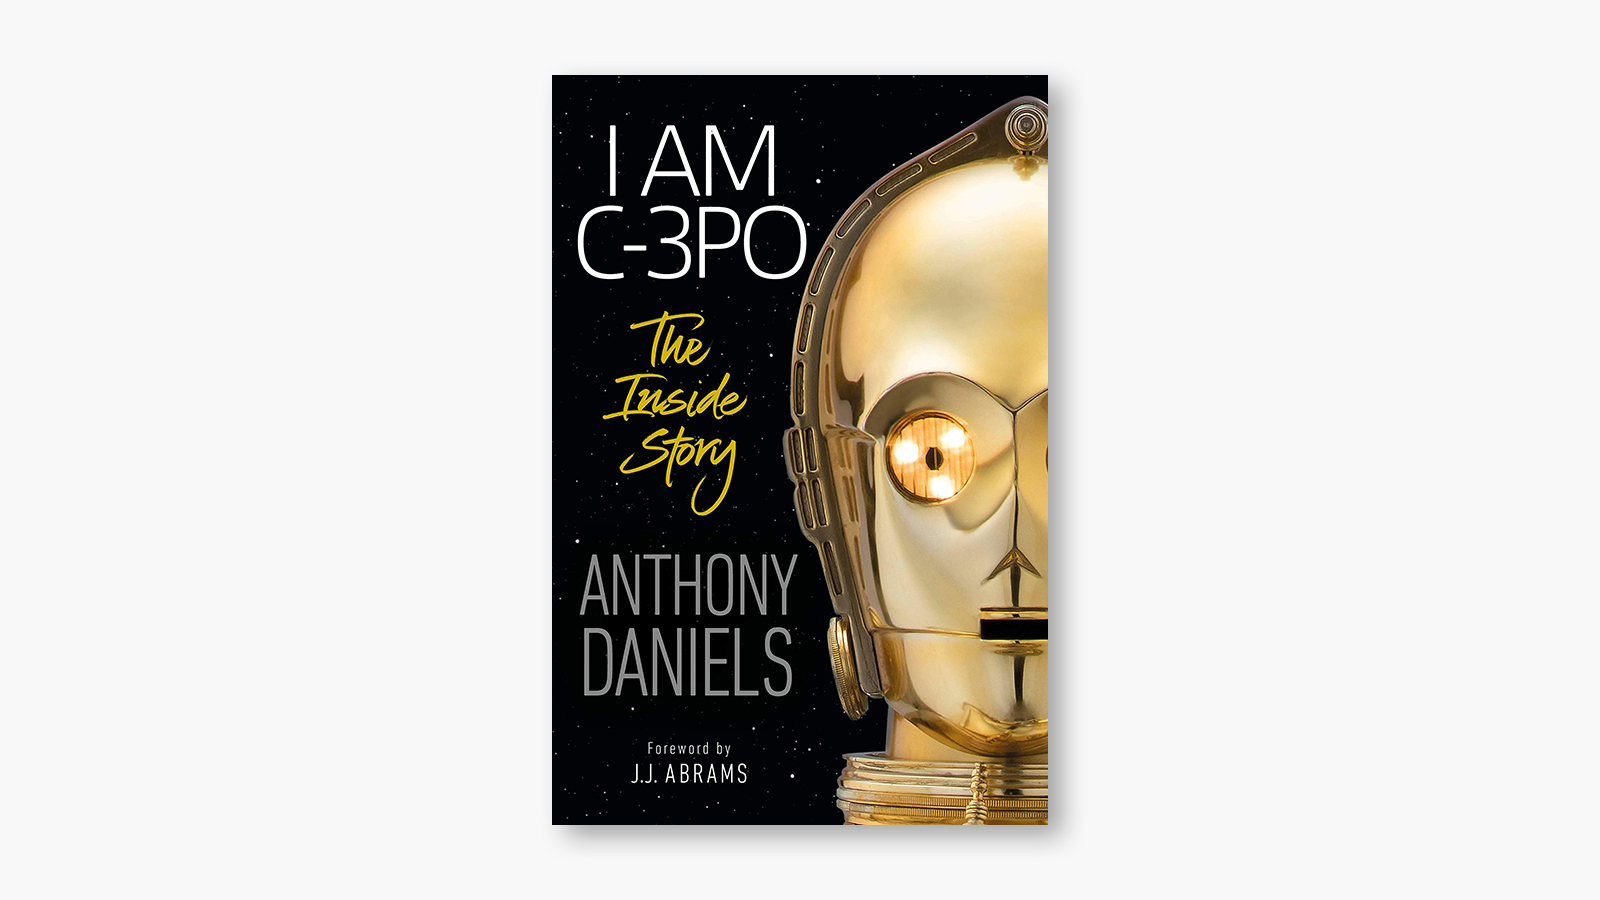 ‘I Am C-3PO - The Inside Story’ by Anthony Daniels